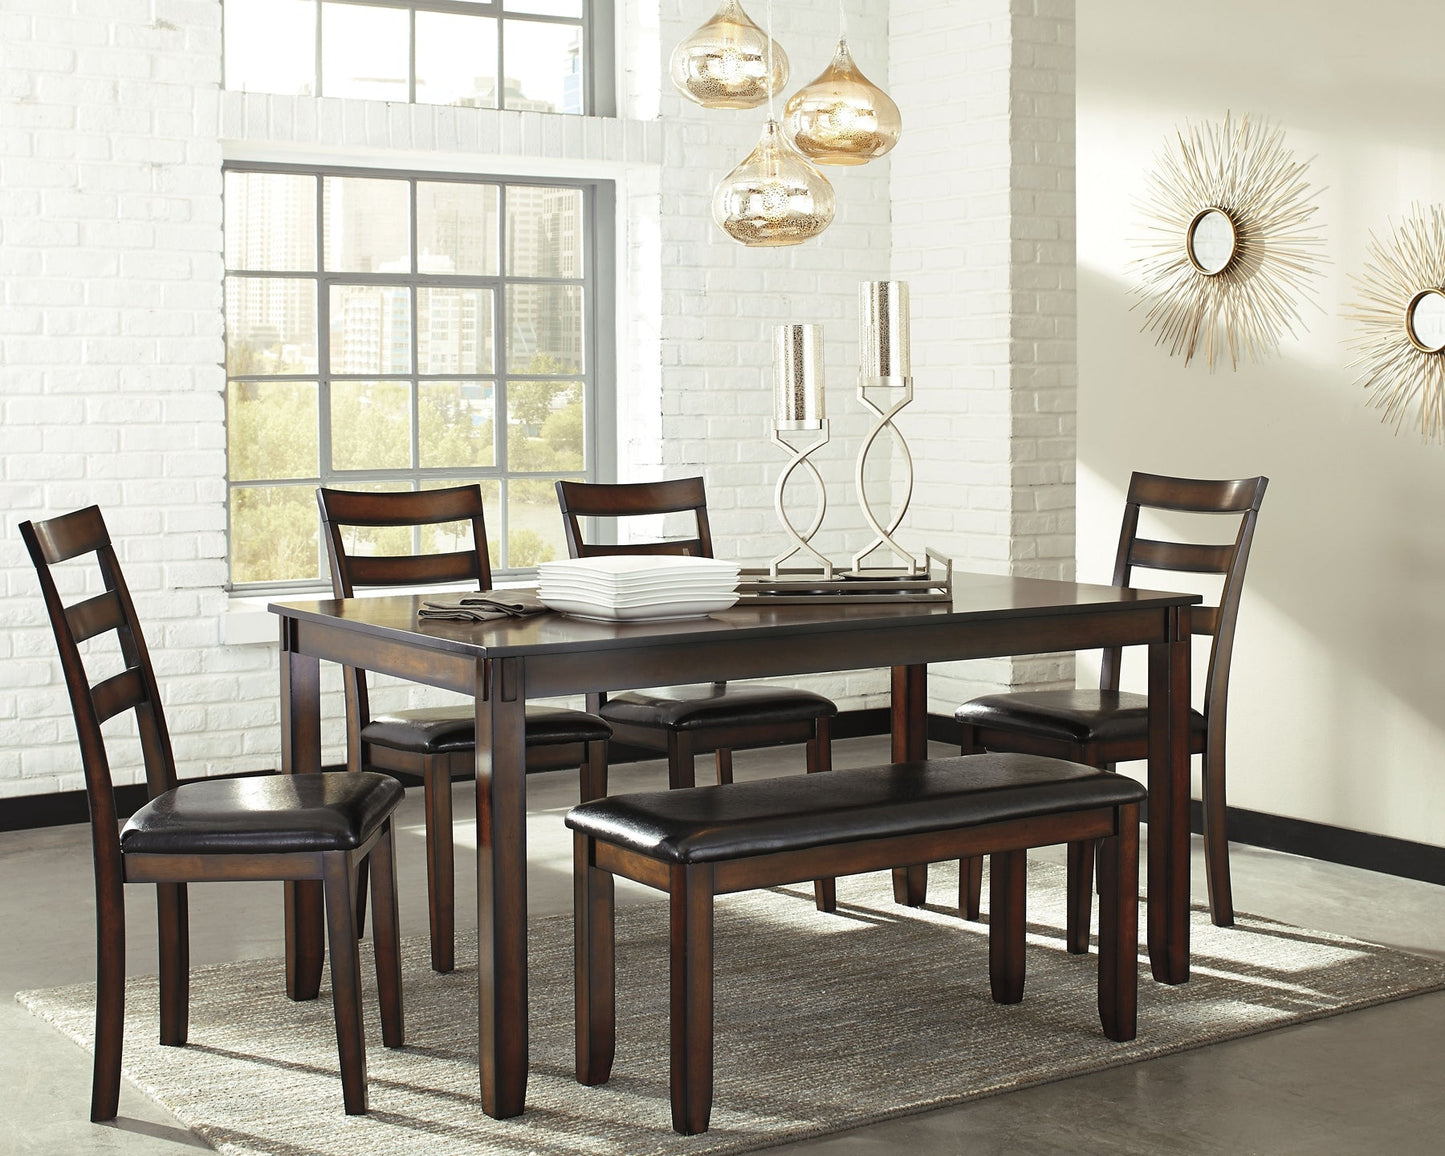 Coviar Dining Room Table Set (6/CN) at Walker Mattress and Furniture Locations in Cedar Park and Belton TX.